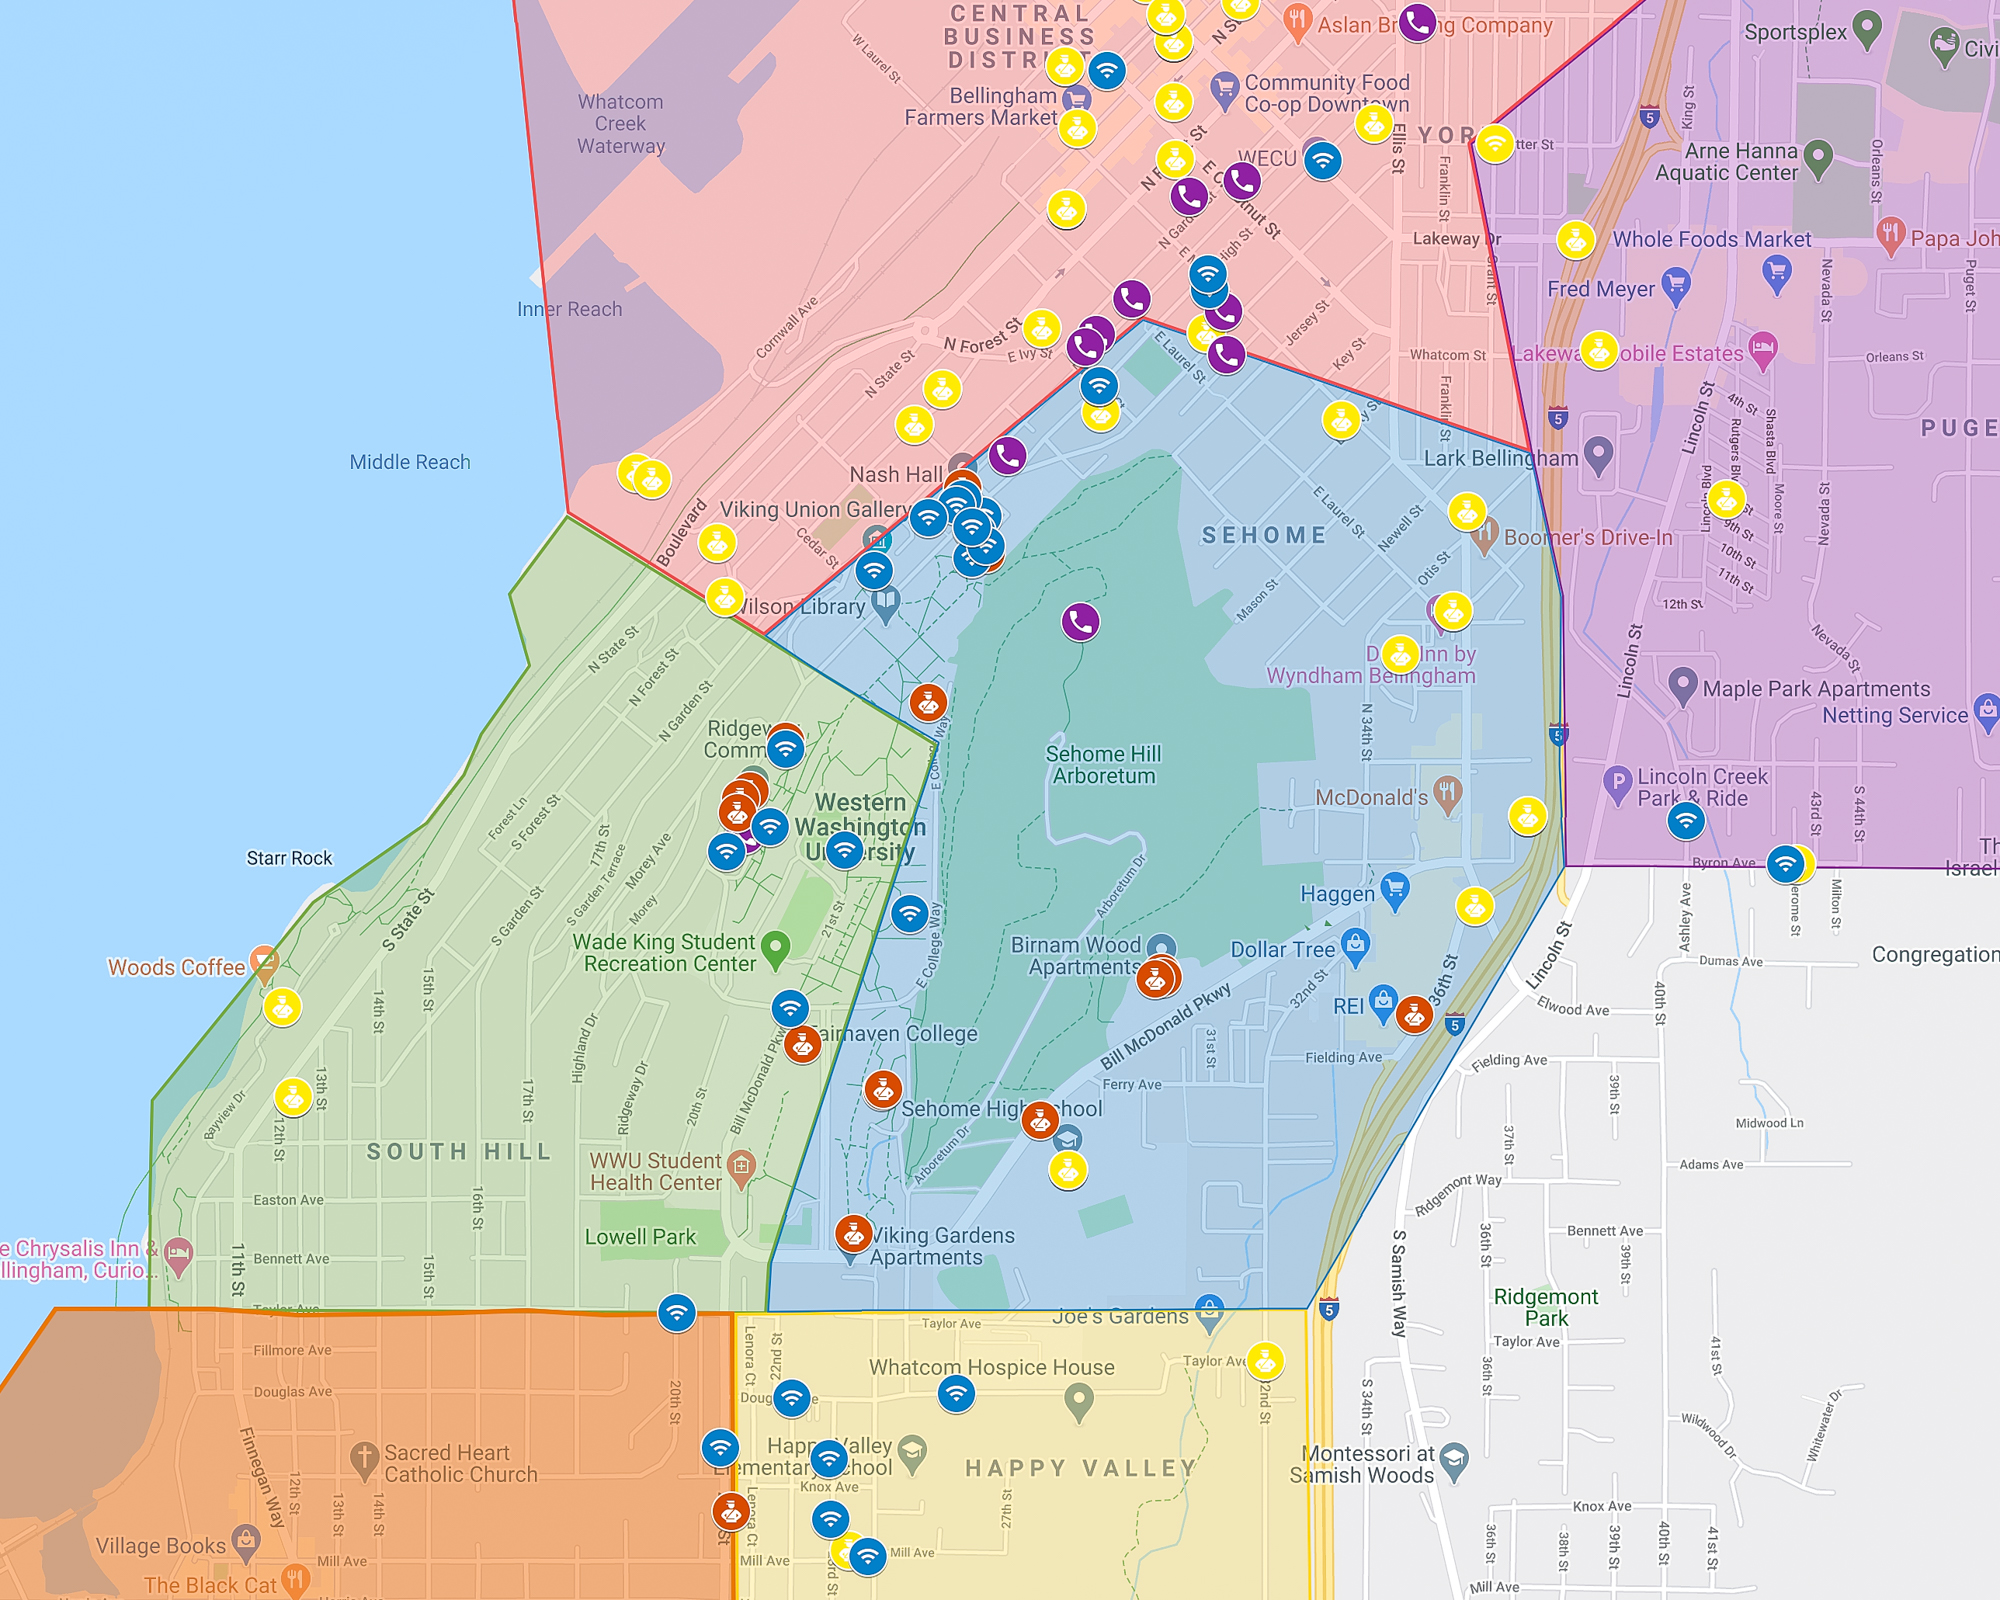 Photo of a map of Bellingham with points where people reported assault.